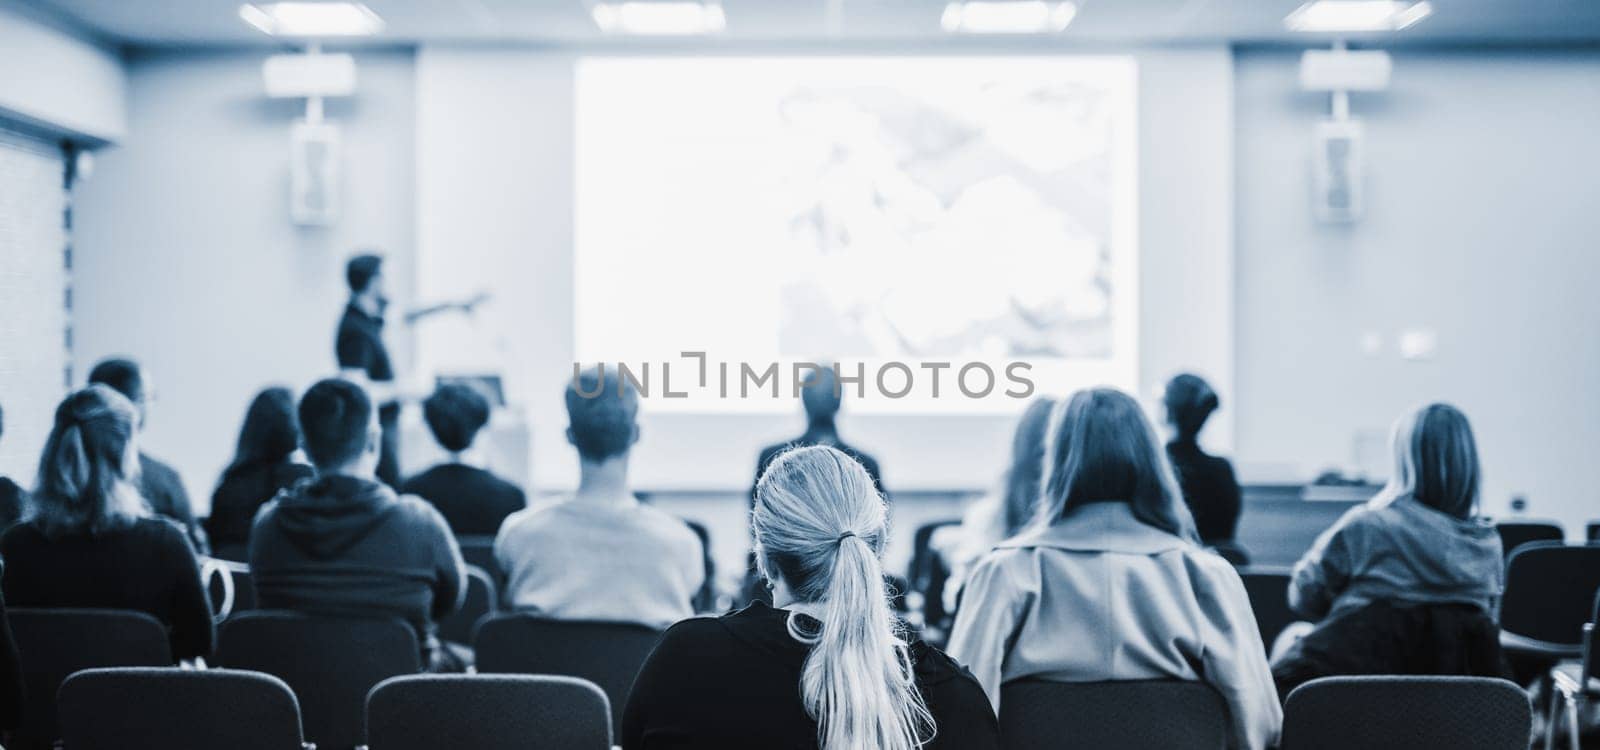 Speaker giving a talk in conference hall at business event. Rear view of unrecognizable people in audience at the conference hall. Business and entrepreneurship concept. Blue tones black and white. by kasto